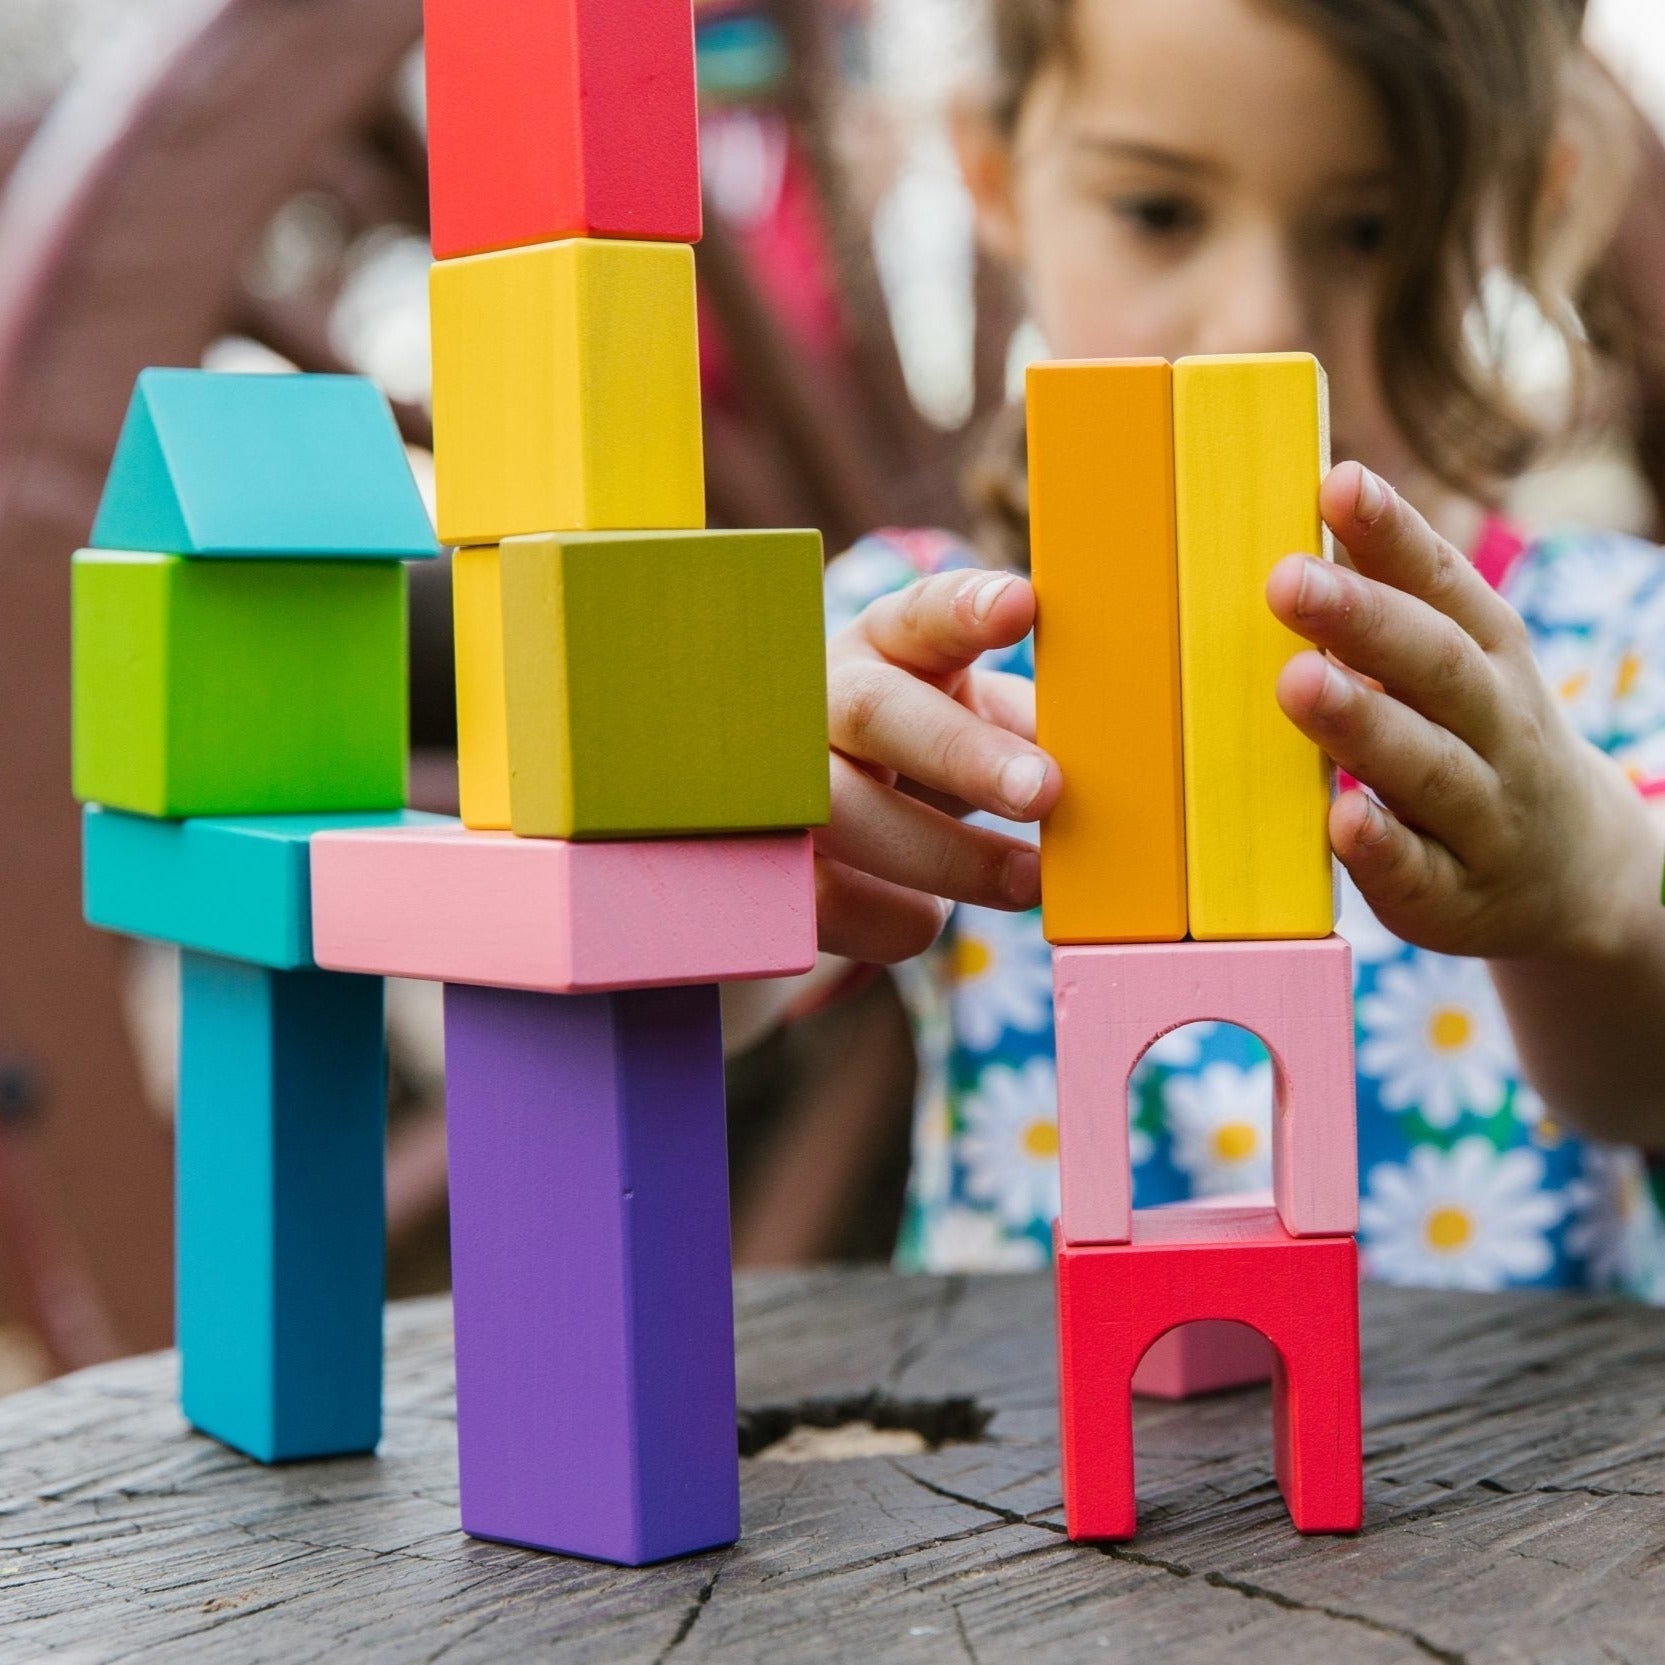 Designer Blocks, Introducing the Wooden Designer Blocks - the perfect building blocks for budding builders! With their beautiful, bright, and sturdy design, these blocks will inspire creativity and create exciting structures.The blocks come in a variety of eye-catching colors, including pink, green, blue, yellow, orange, and more. Each set includes a range of shapes, such as squares, arches, and rods, allowing children to explore and discover new building possibilities.Not only are these blocks fun to play 